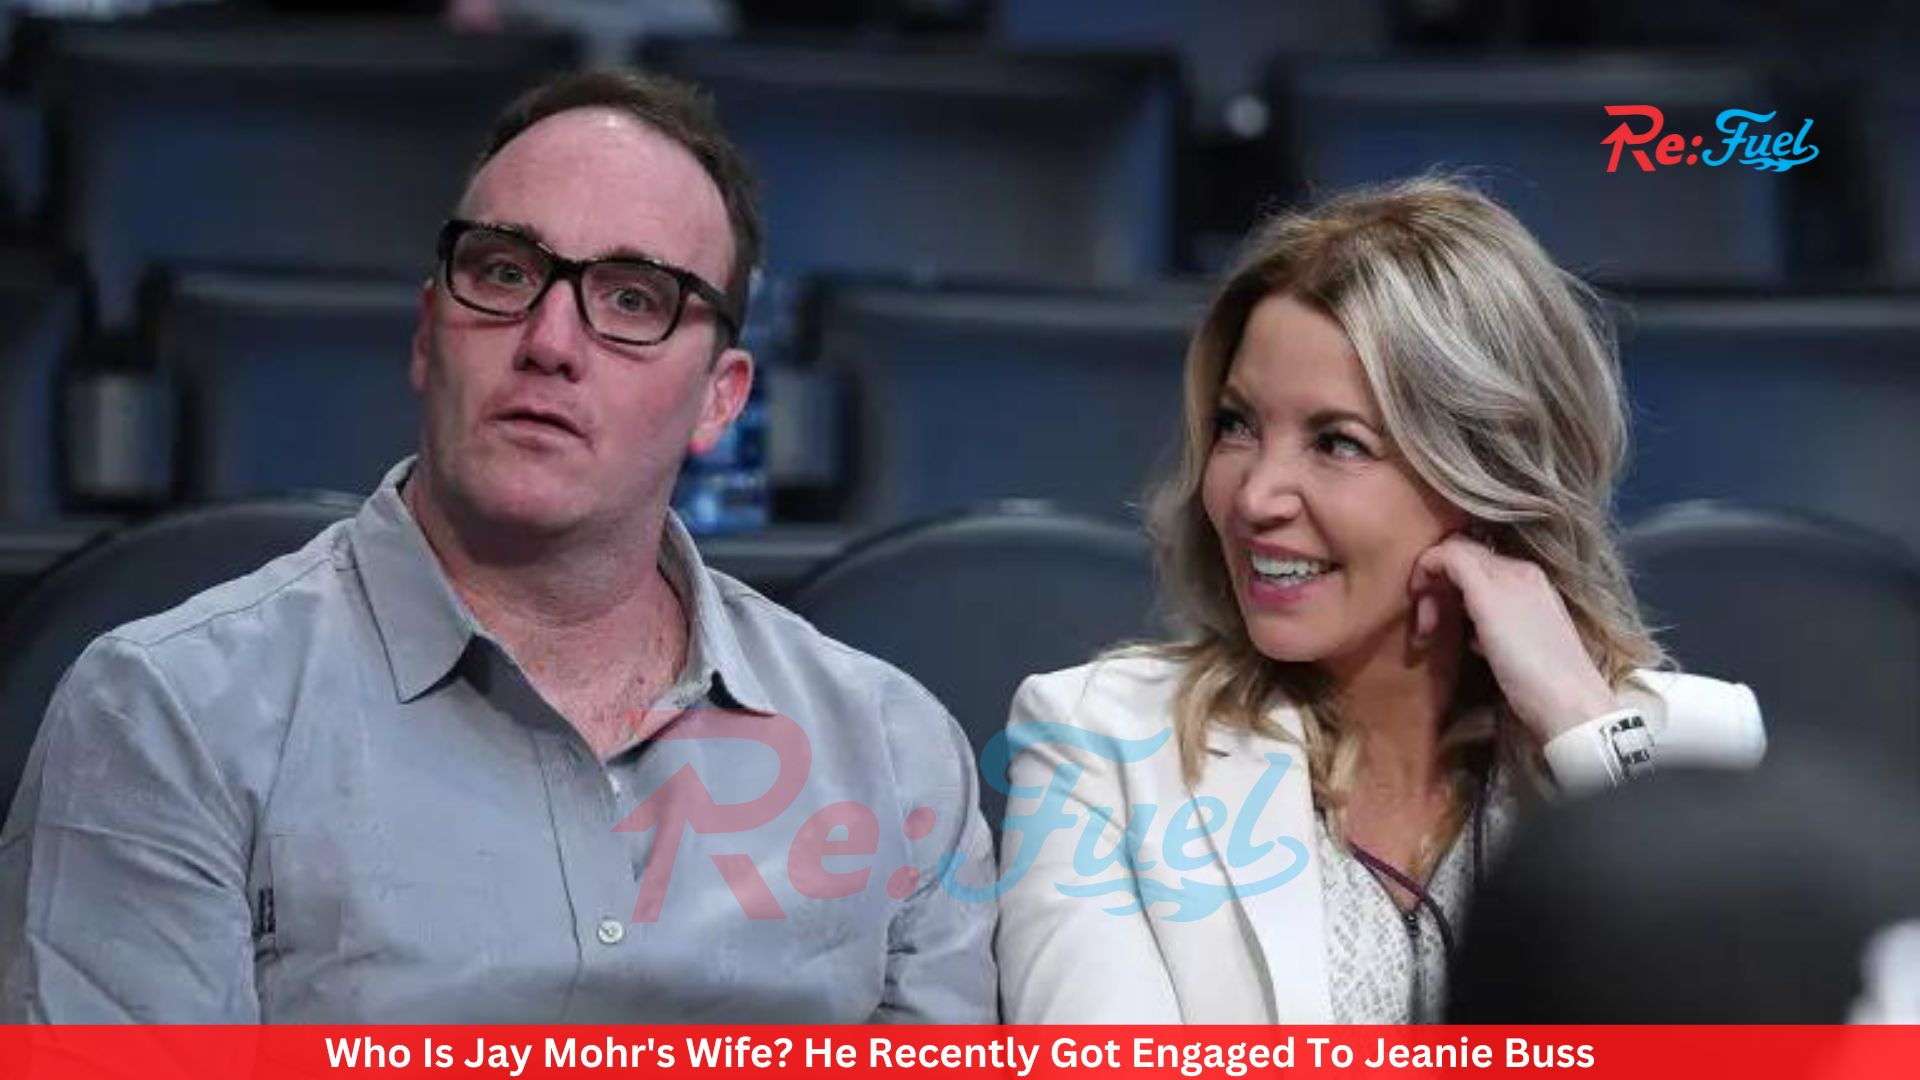 Who Is Jay Mohr's Wife? He Recently Got Engaged To Jeanie Buss